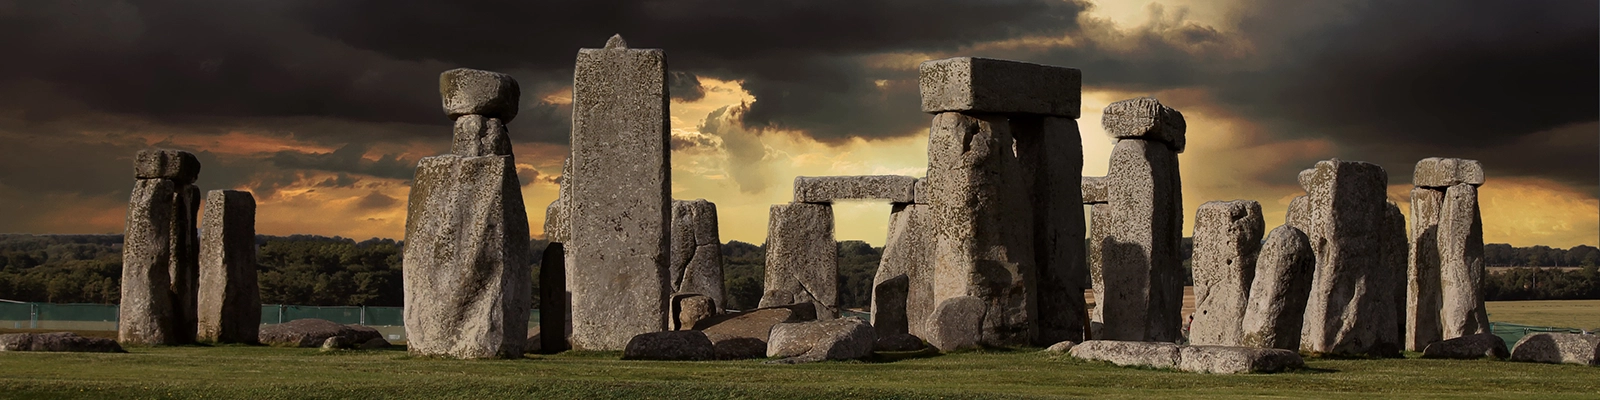 View of Stonehenge with dramatic skies in the background.